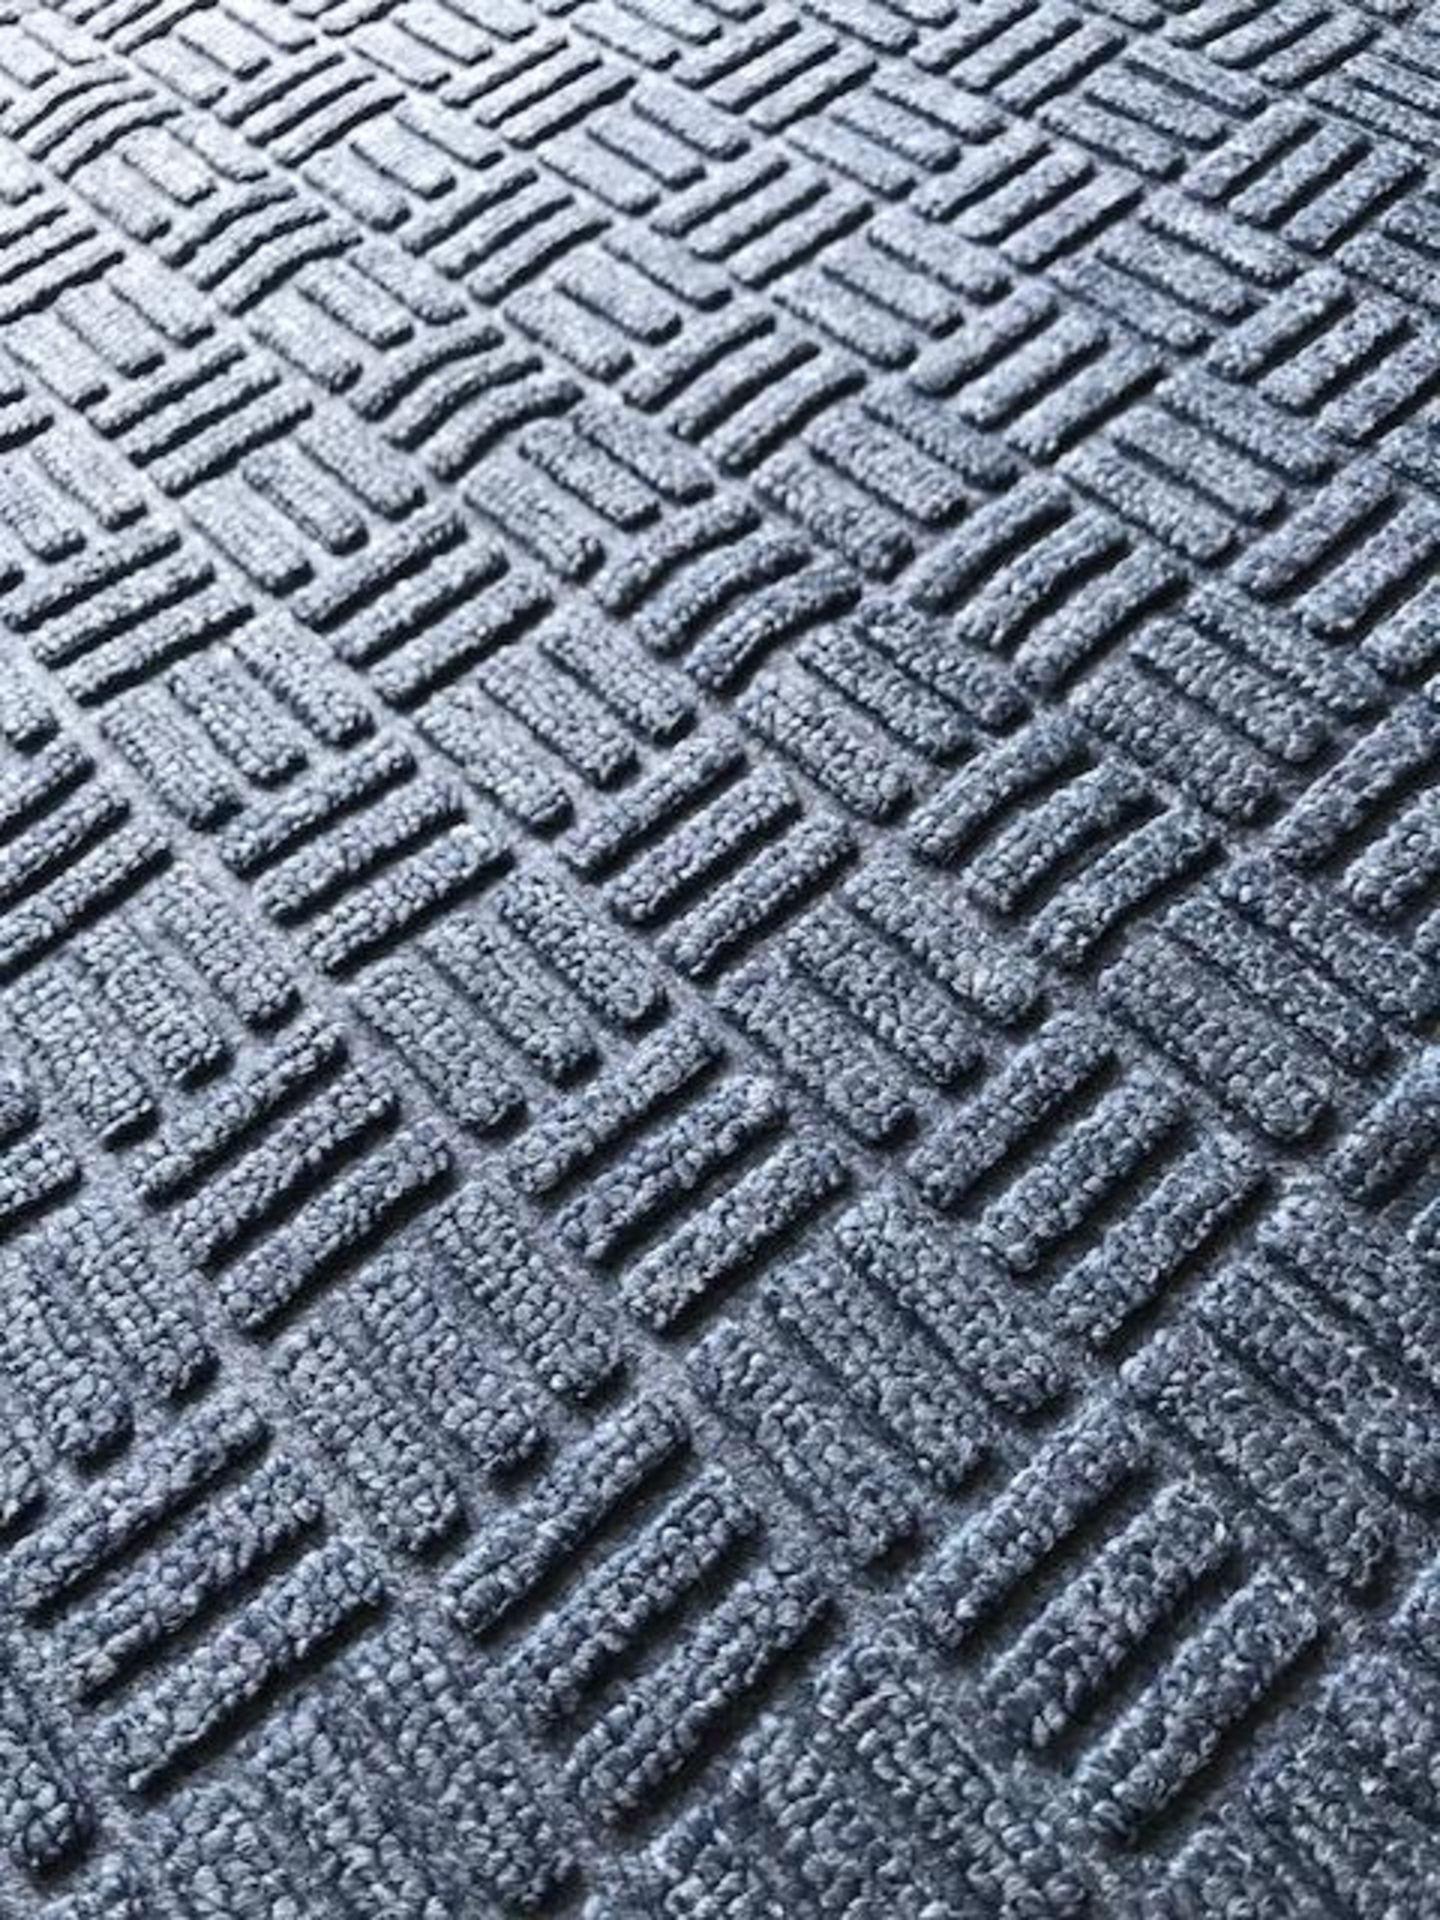 V Brand New Heavy Duty Blue Entrance Mat - Also For Residential Use - Approx 6ft X 4ft - Non Slip - Image 2 of 3